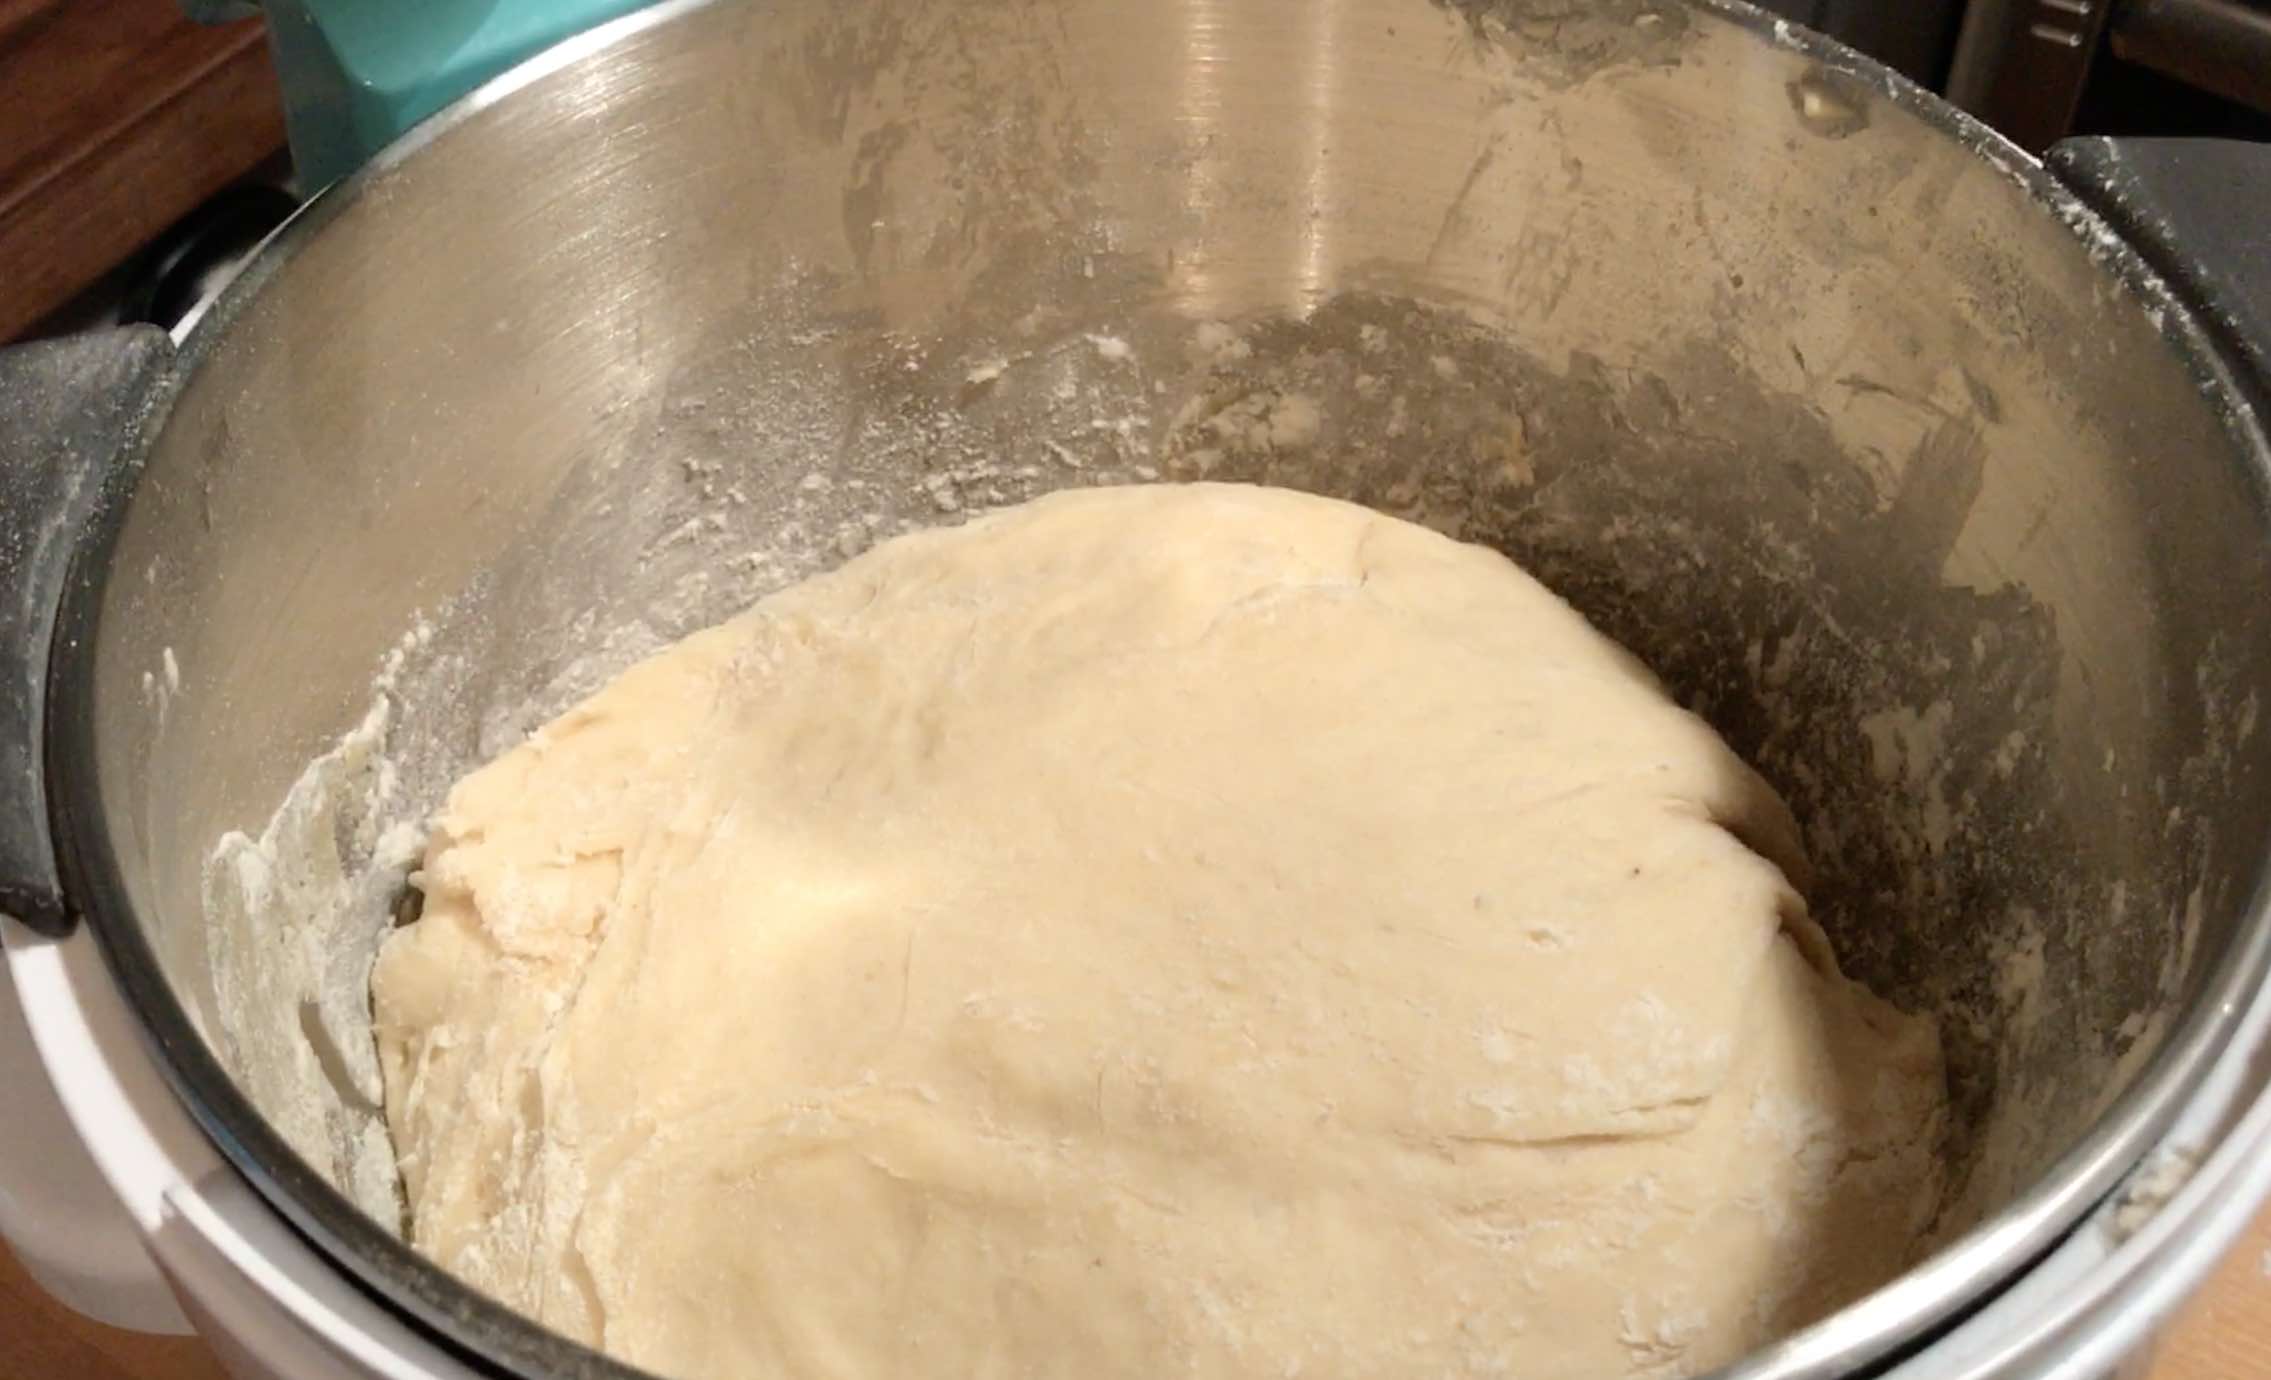 Making bread the easy way with the KitchenAid Precise Heat Mixing Bowl